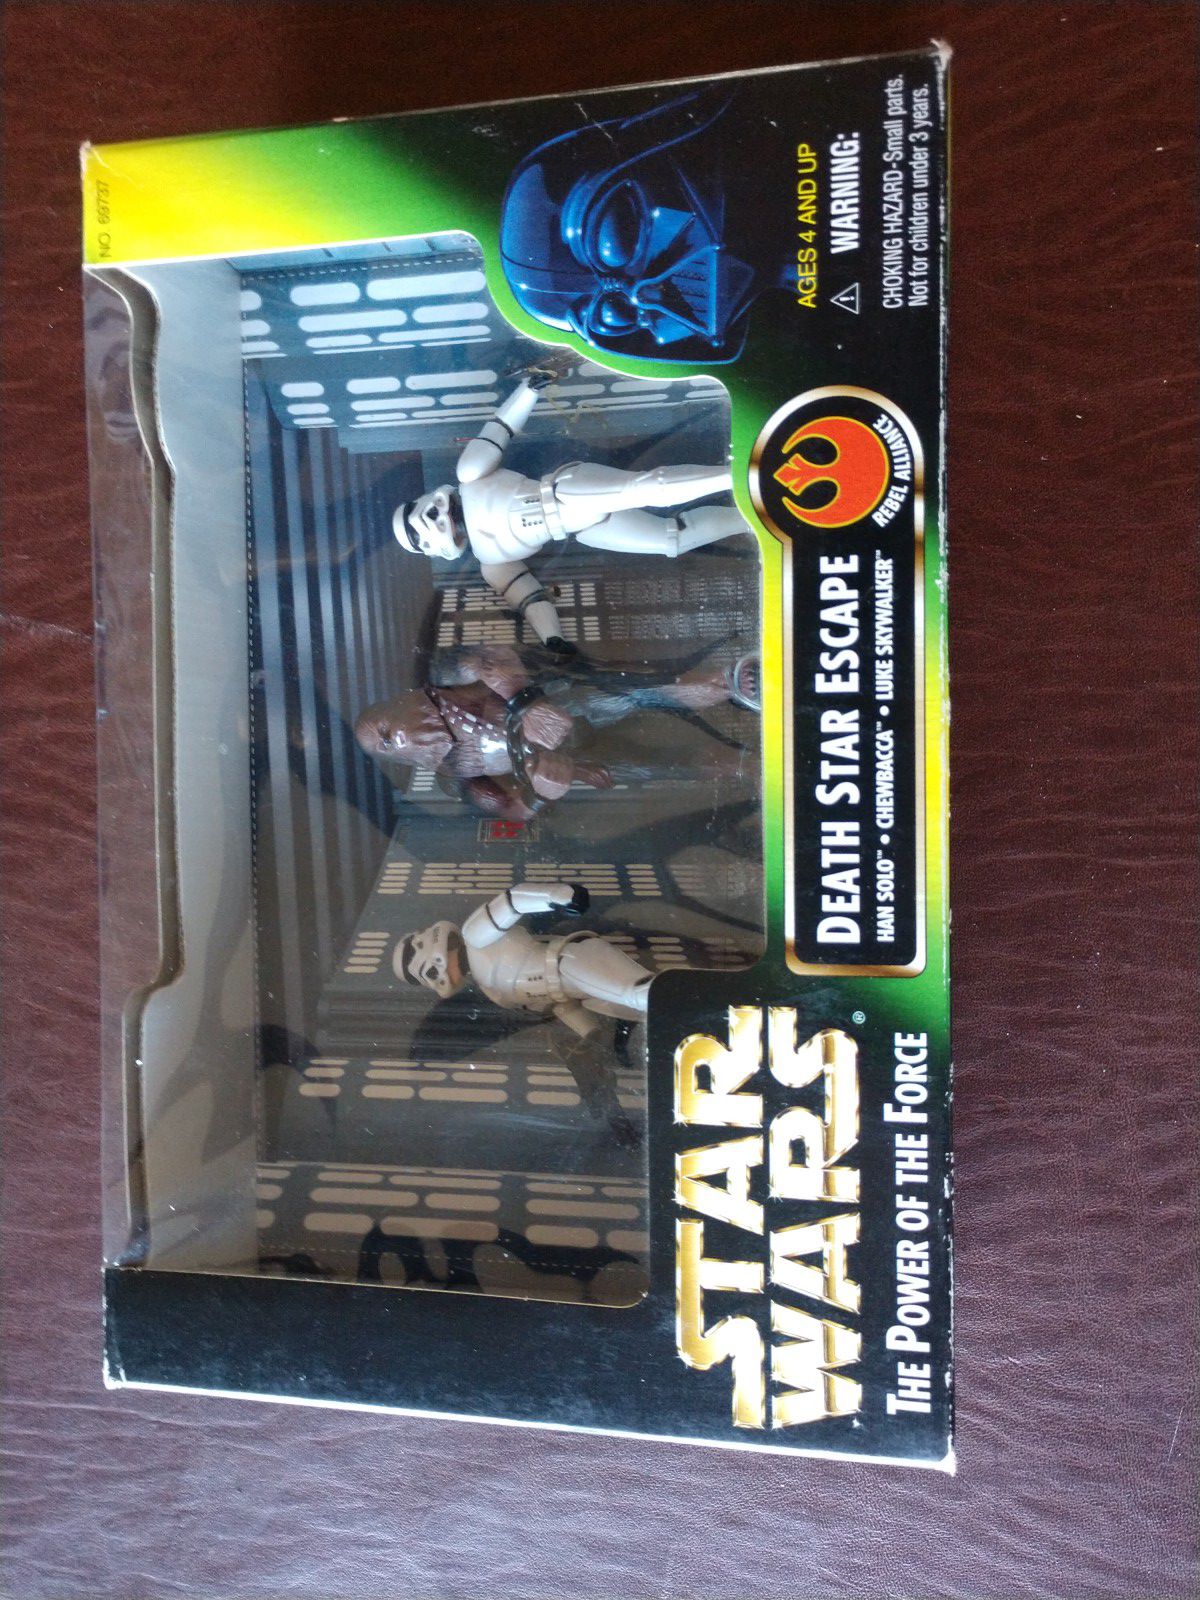 Star wars death star escape action figures by Hasbro